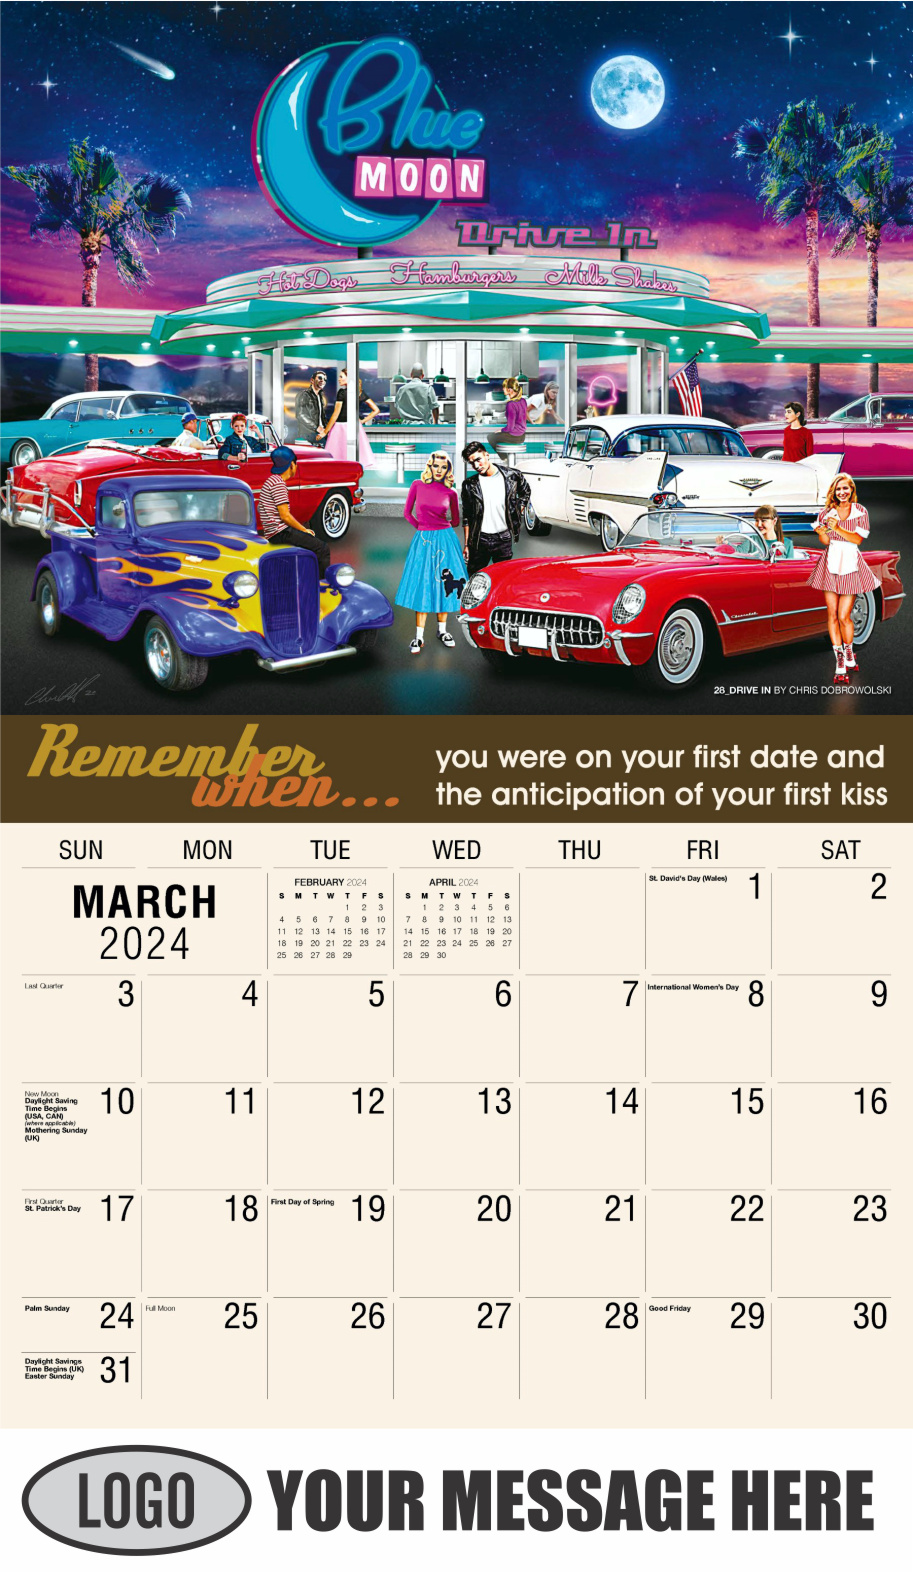 Remember When 2024 Business Advertising Calendar - March